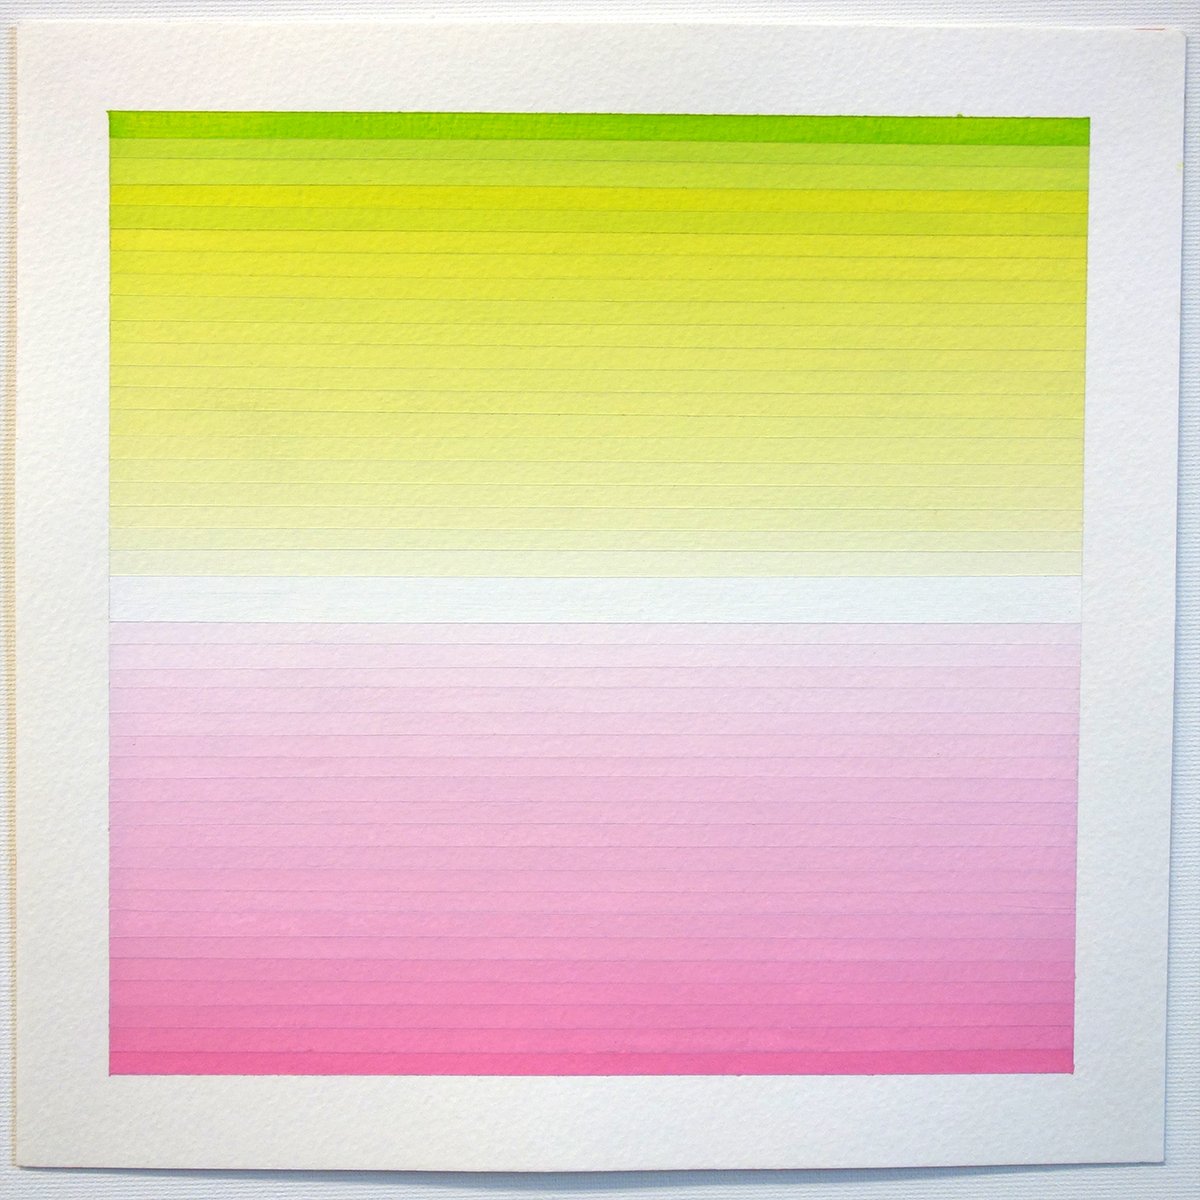 Image of Green, yellow and pink